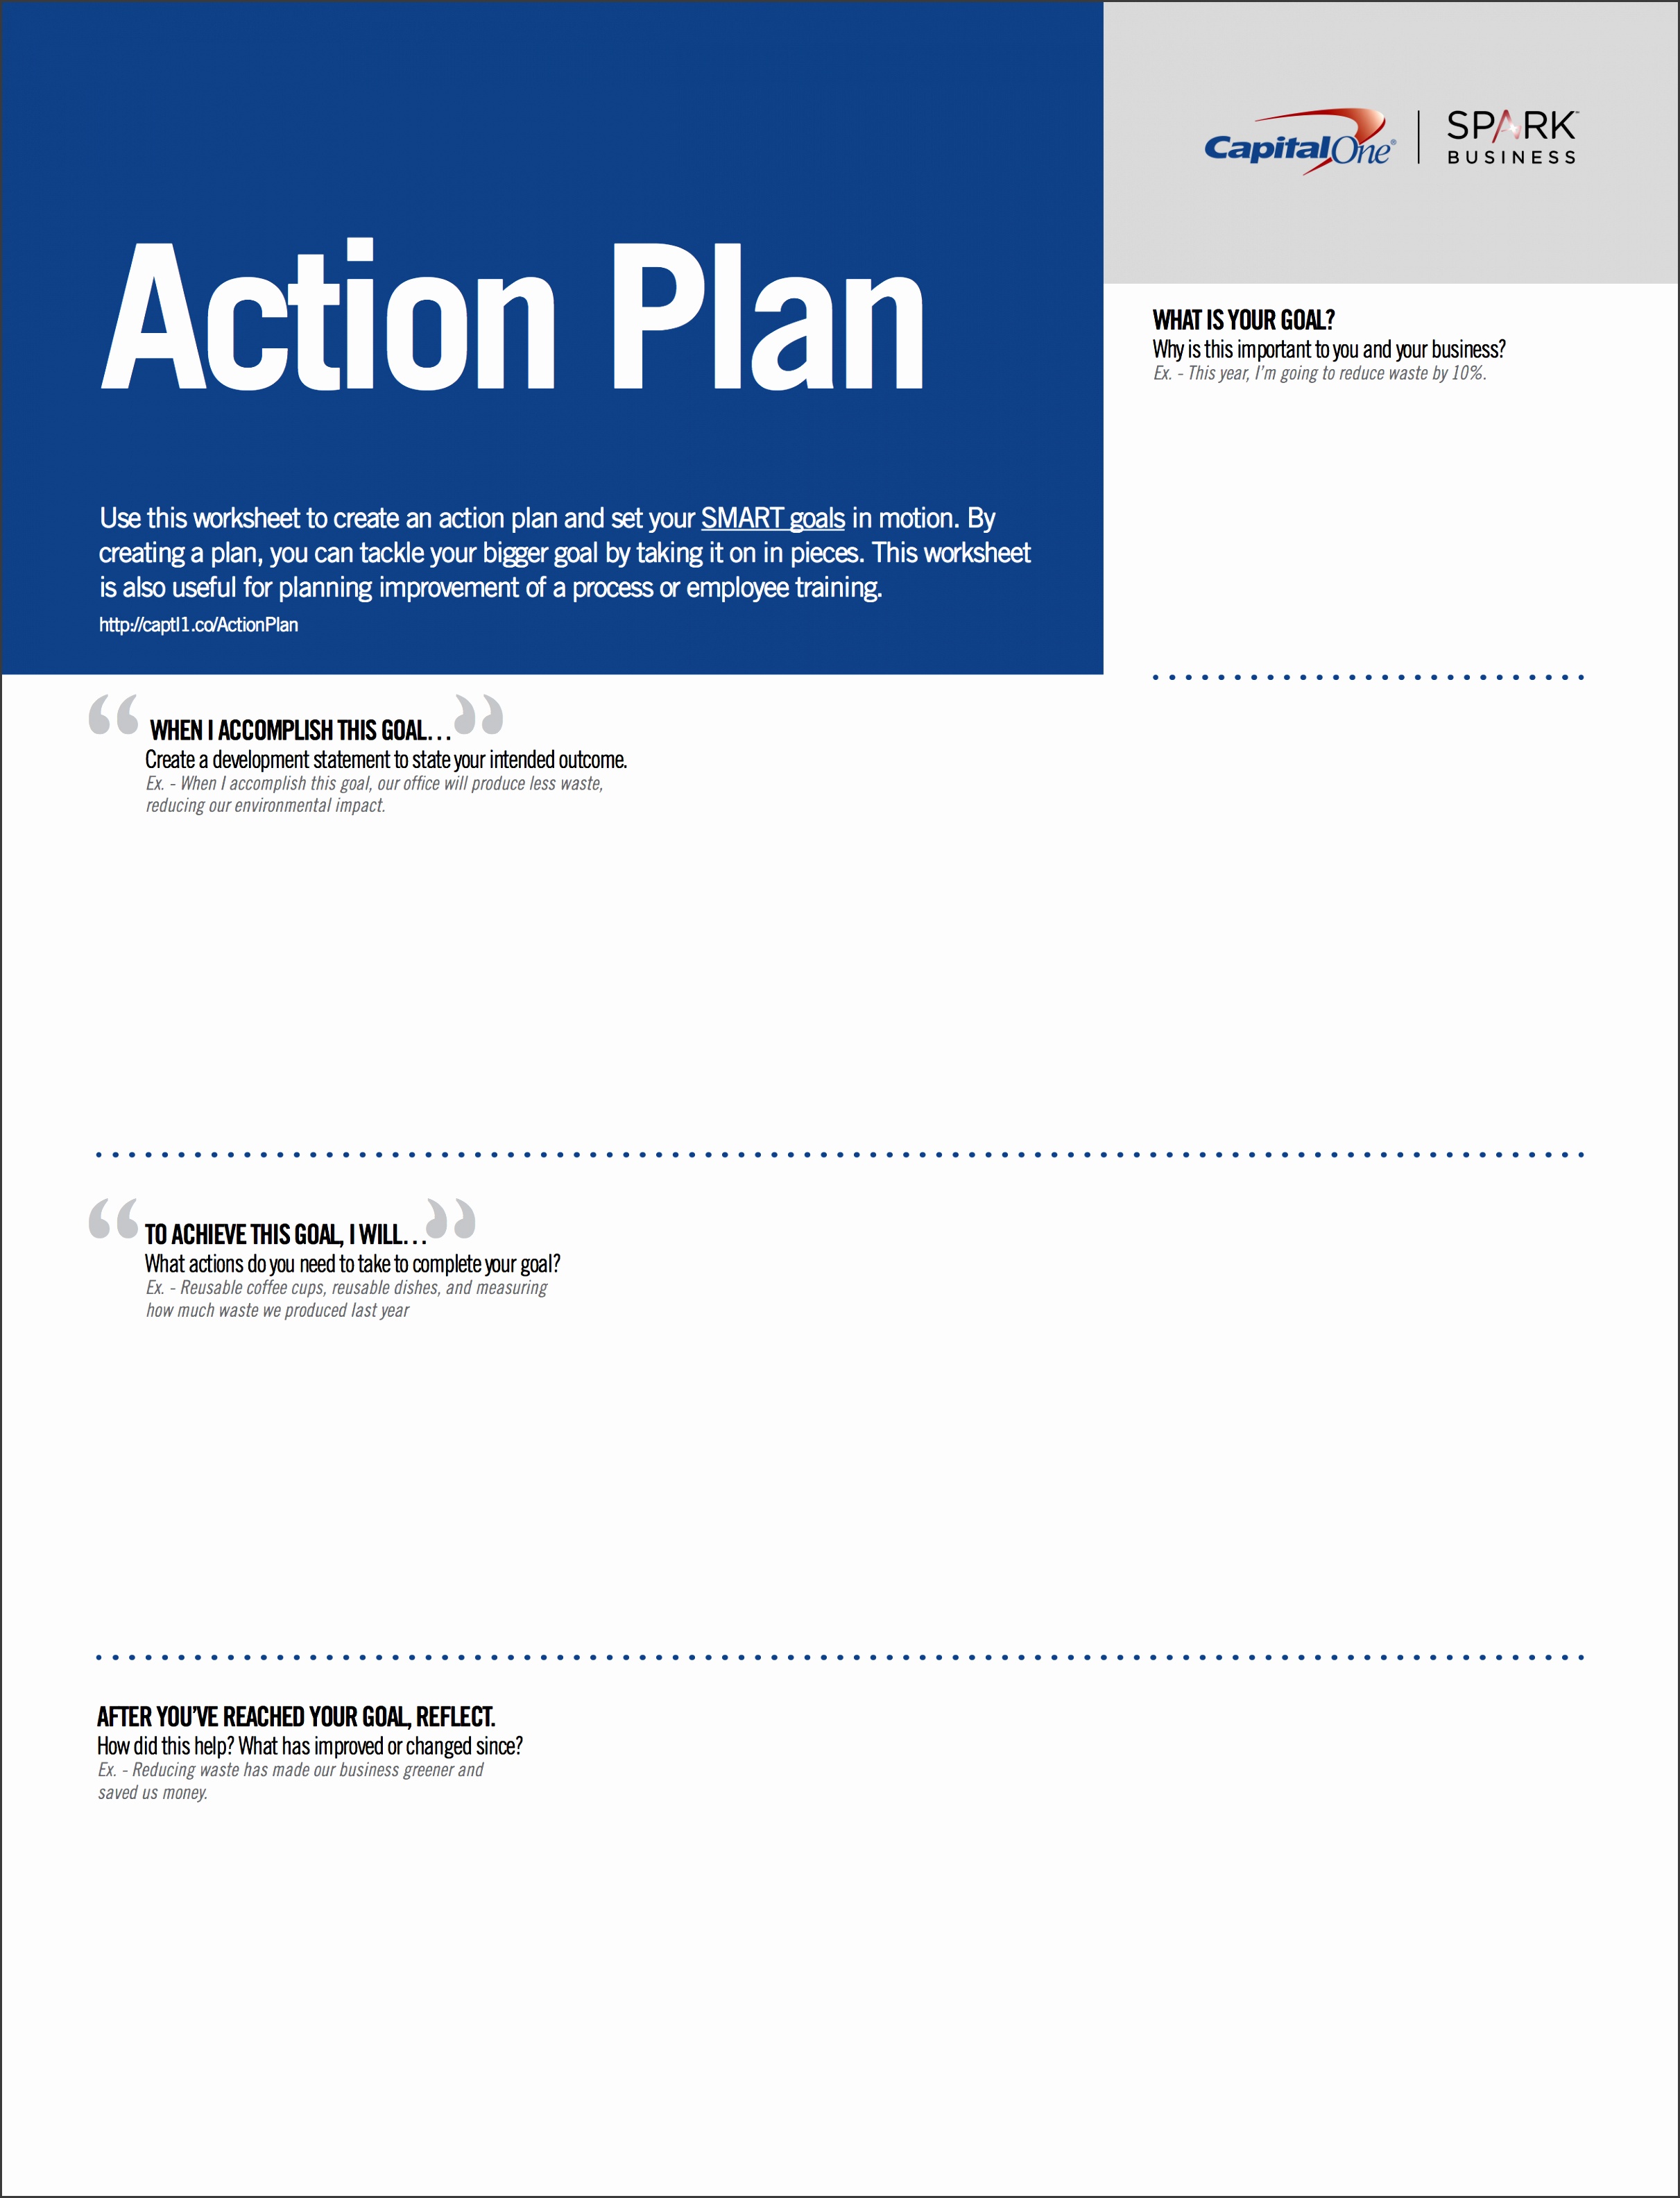 Download the worksheet below and started on your action plan